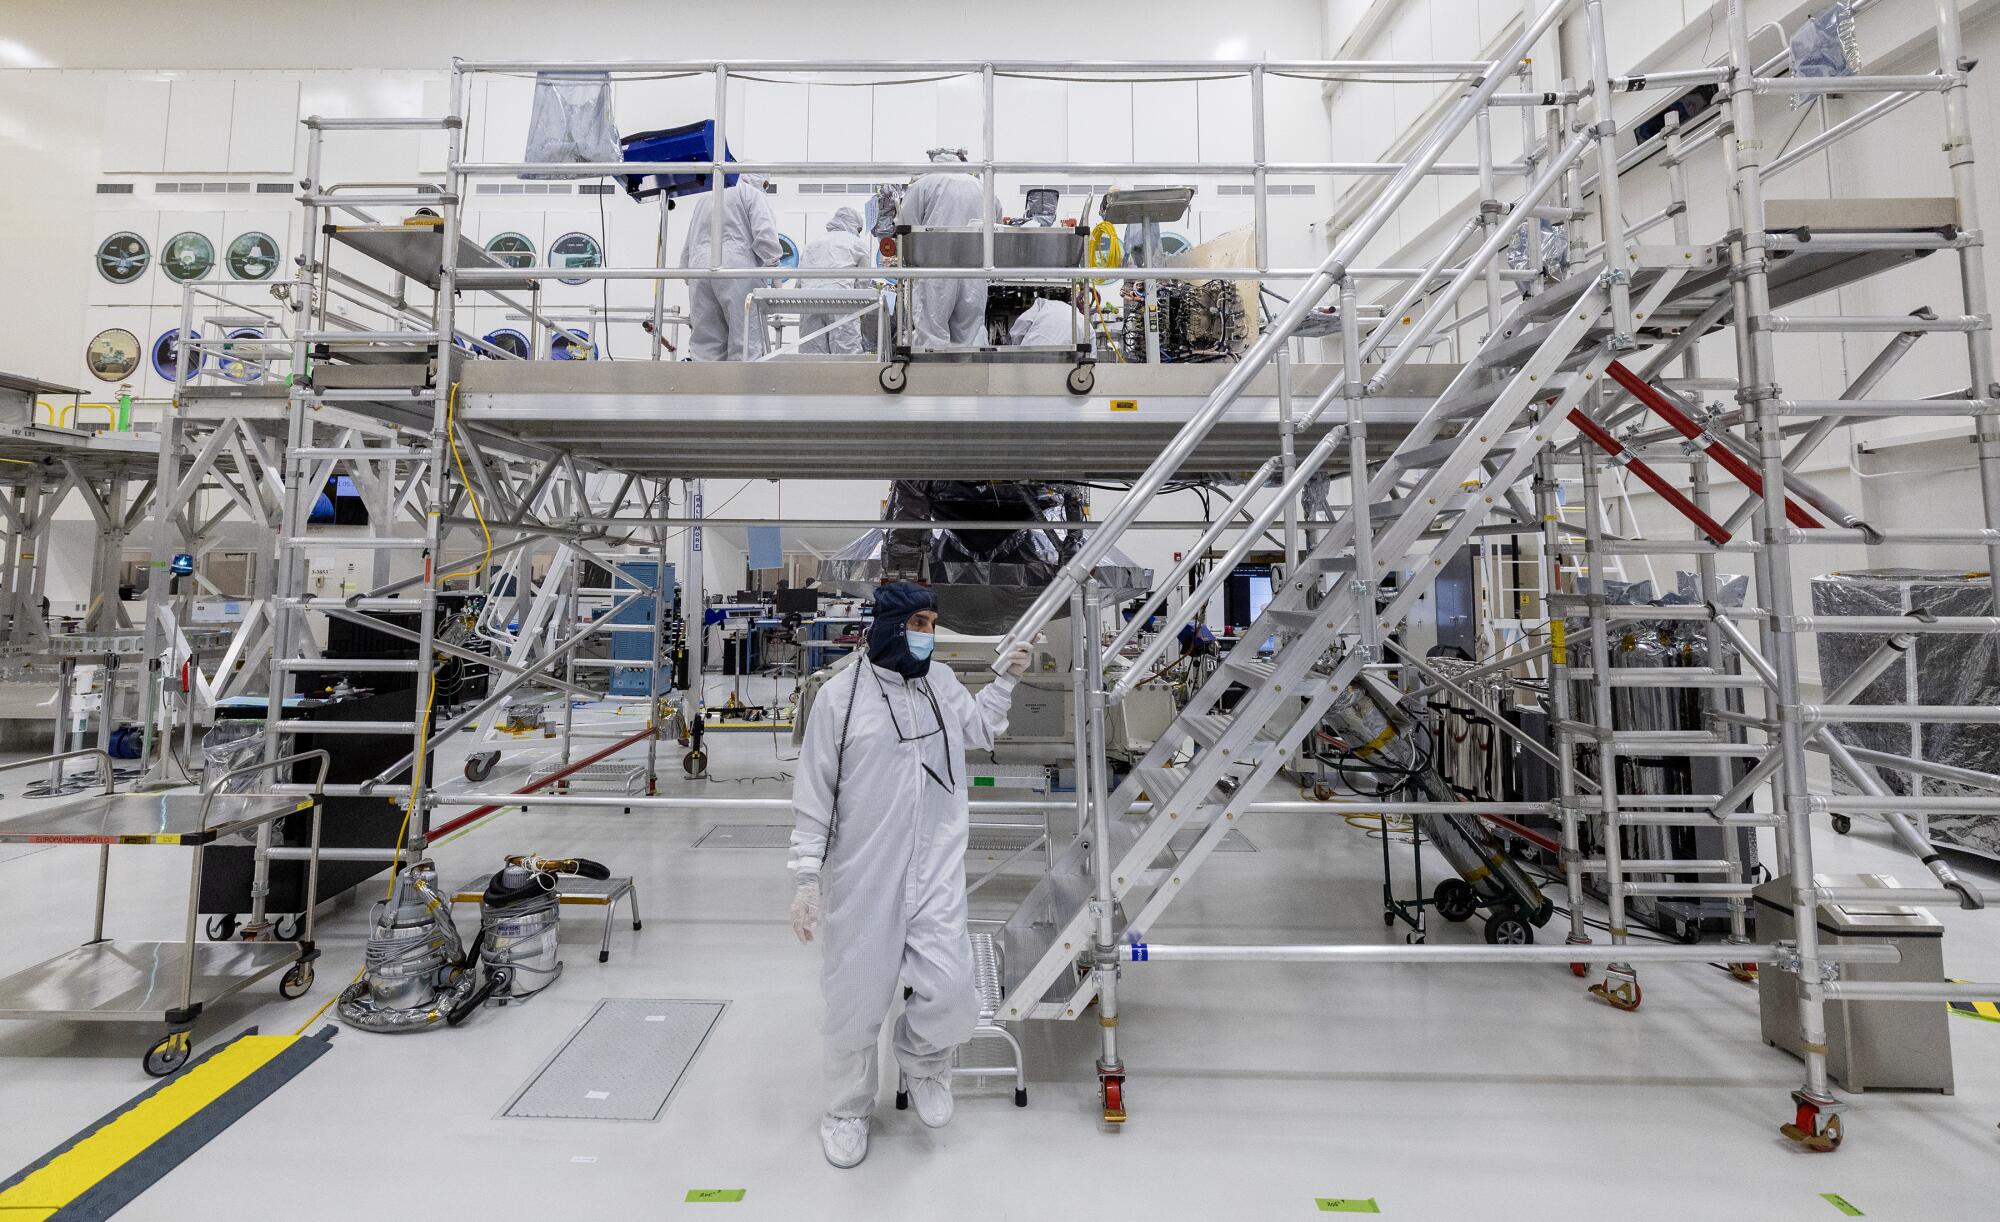 Engineers and technicians work on the Europa Clipper spacecraft, which is surrounded by scaffolding.